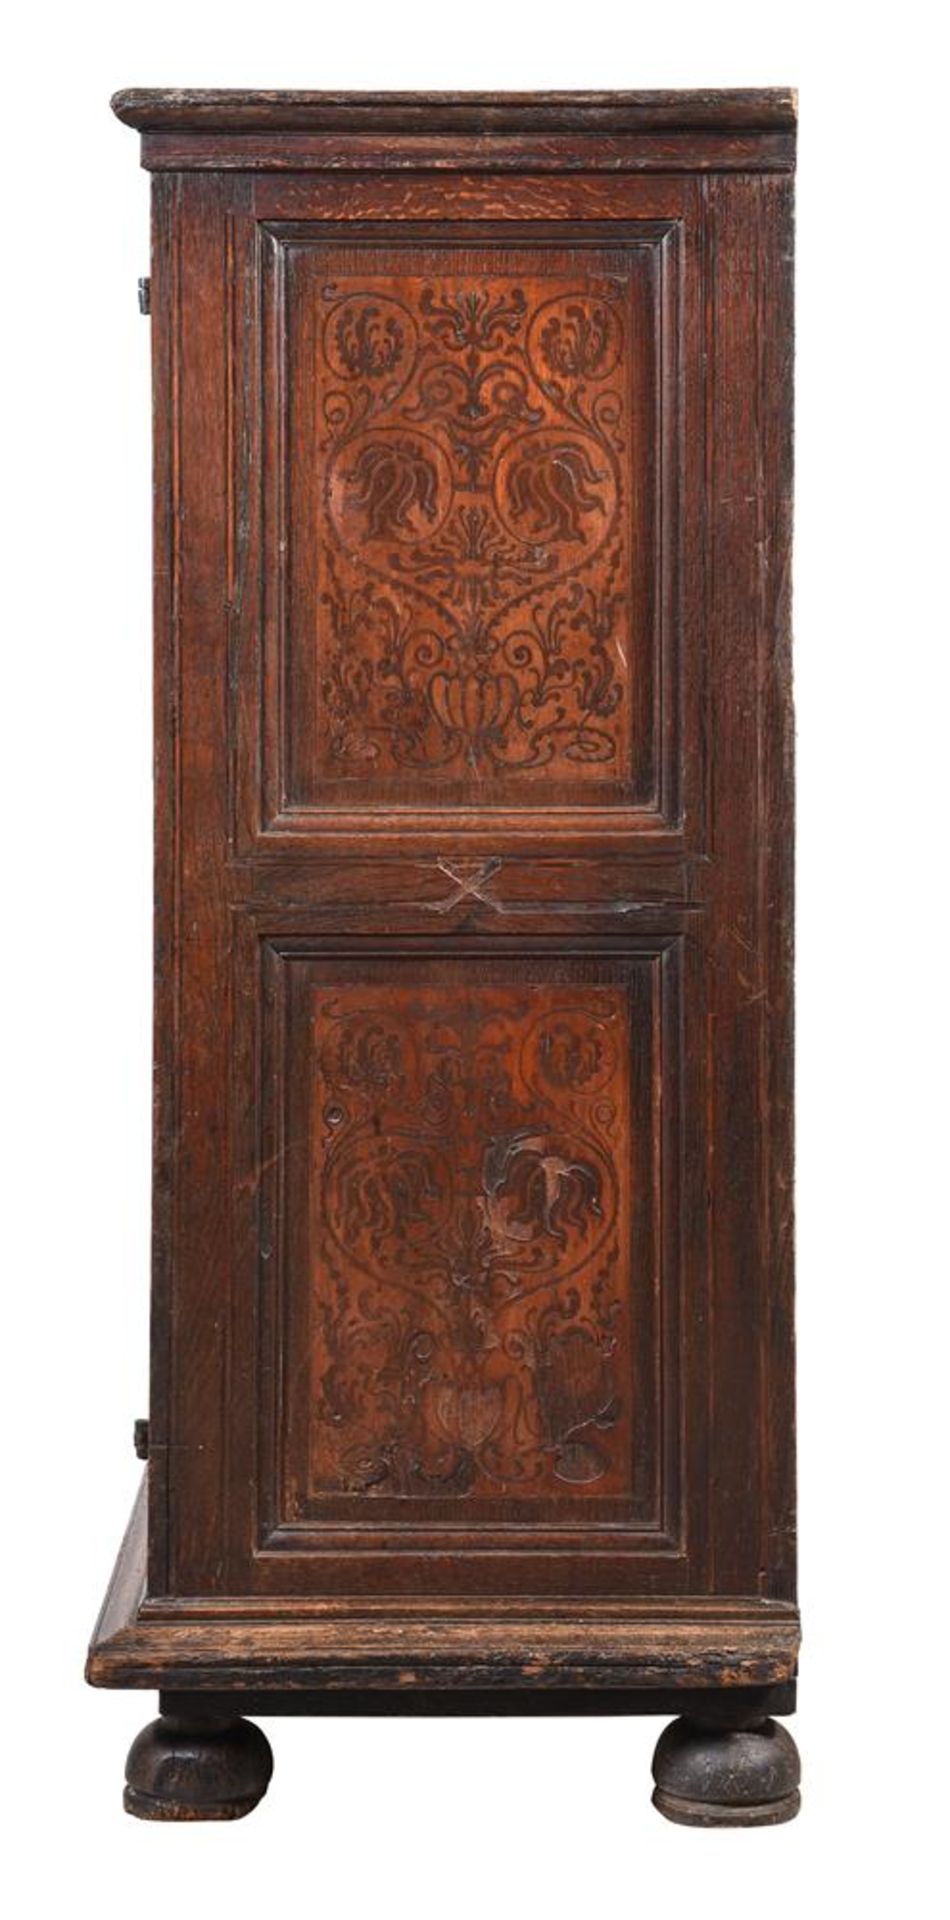 A CONTINENTAL OAK AND MARQUETRY CUPBOARD LATE 17TH/EARLY 18TH CENTURY - Image 6 of 6